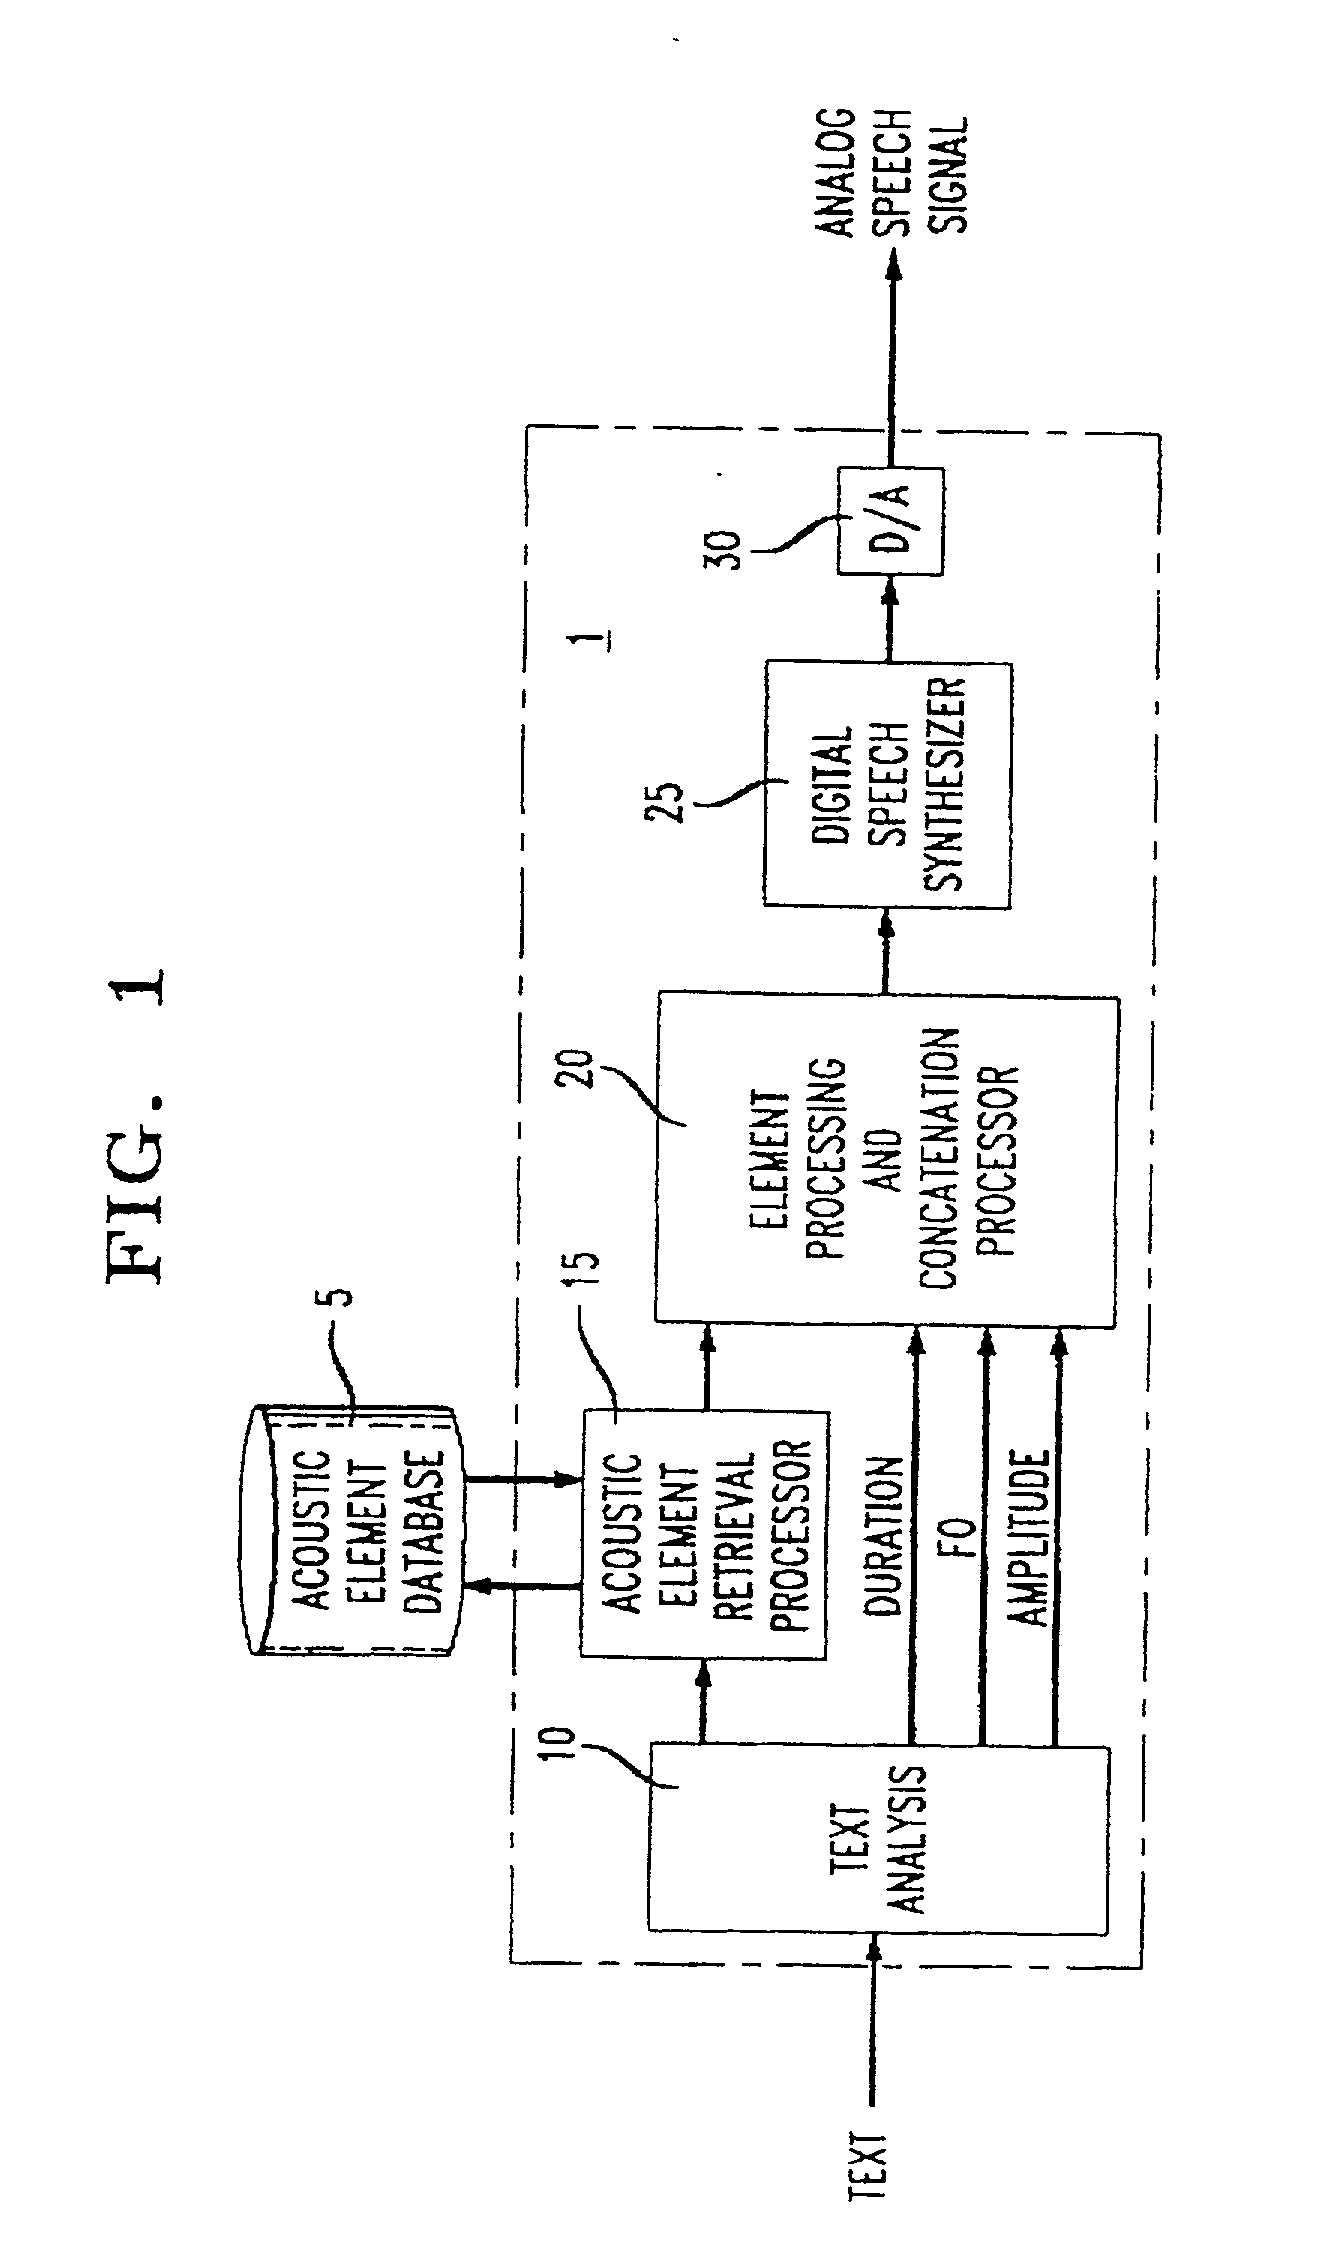 System and method for compressing concatenative acoustic inventories for speech synthesis